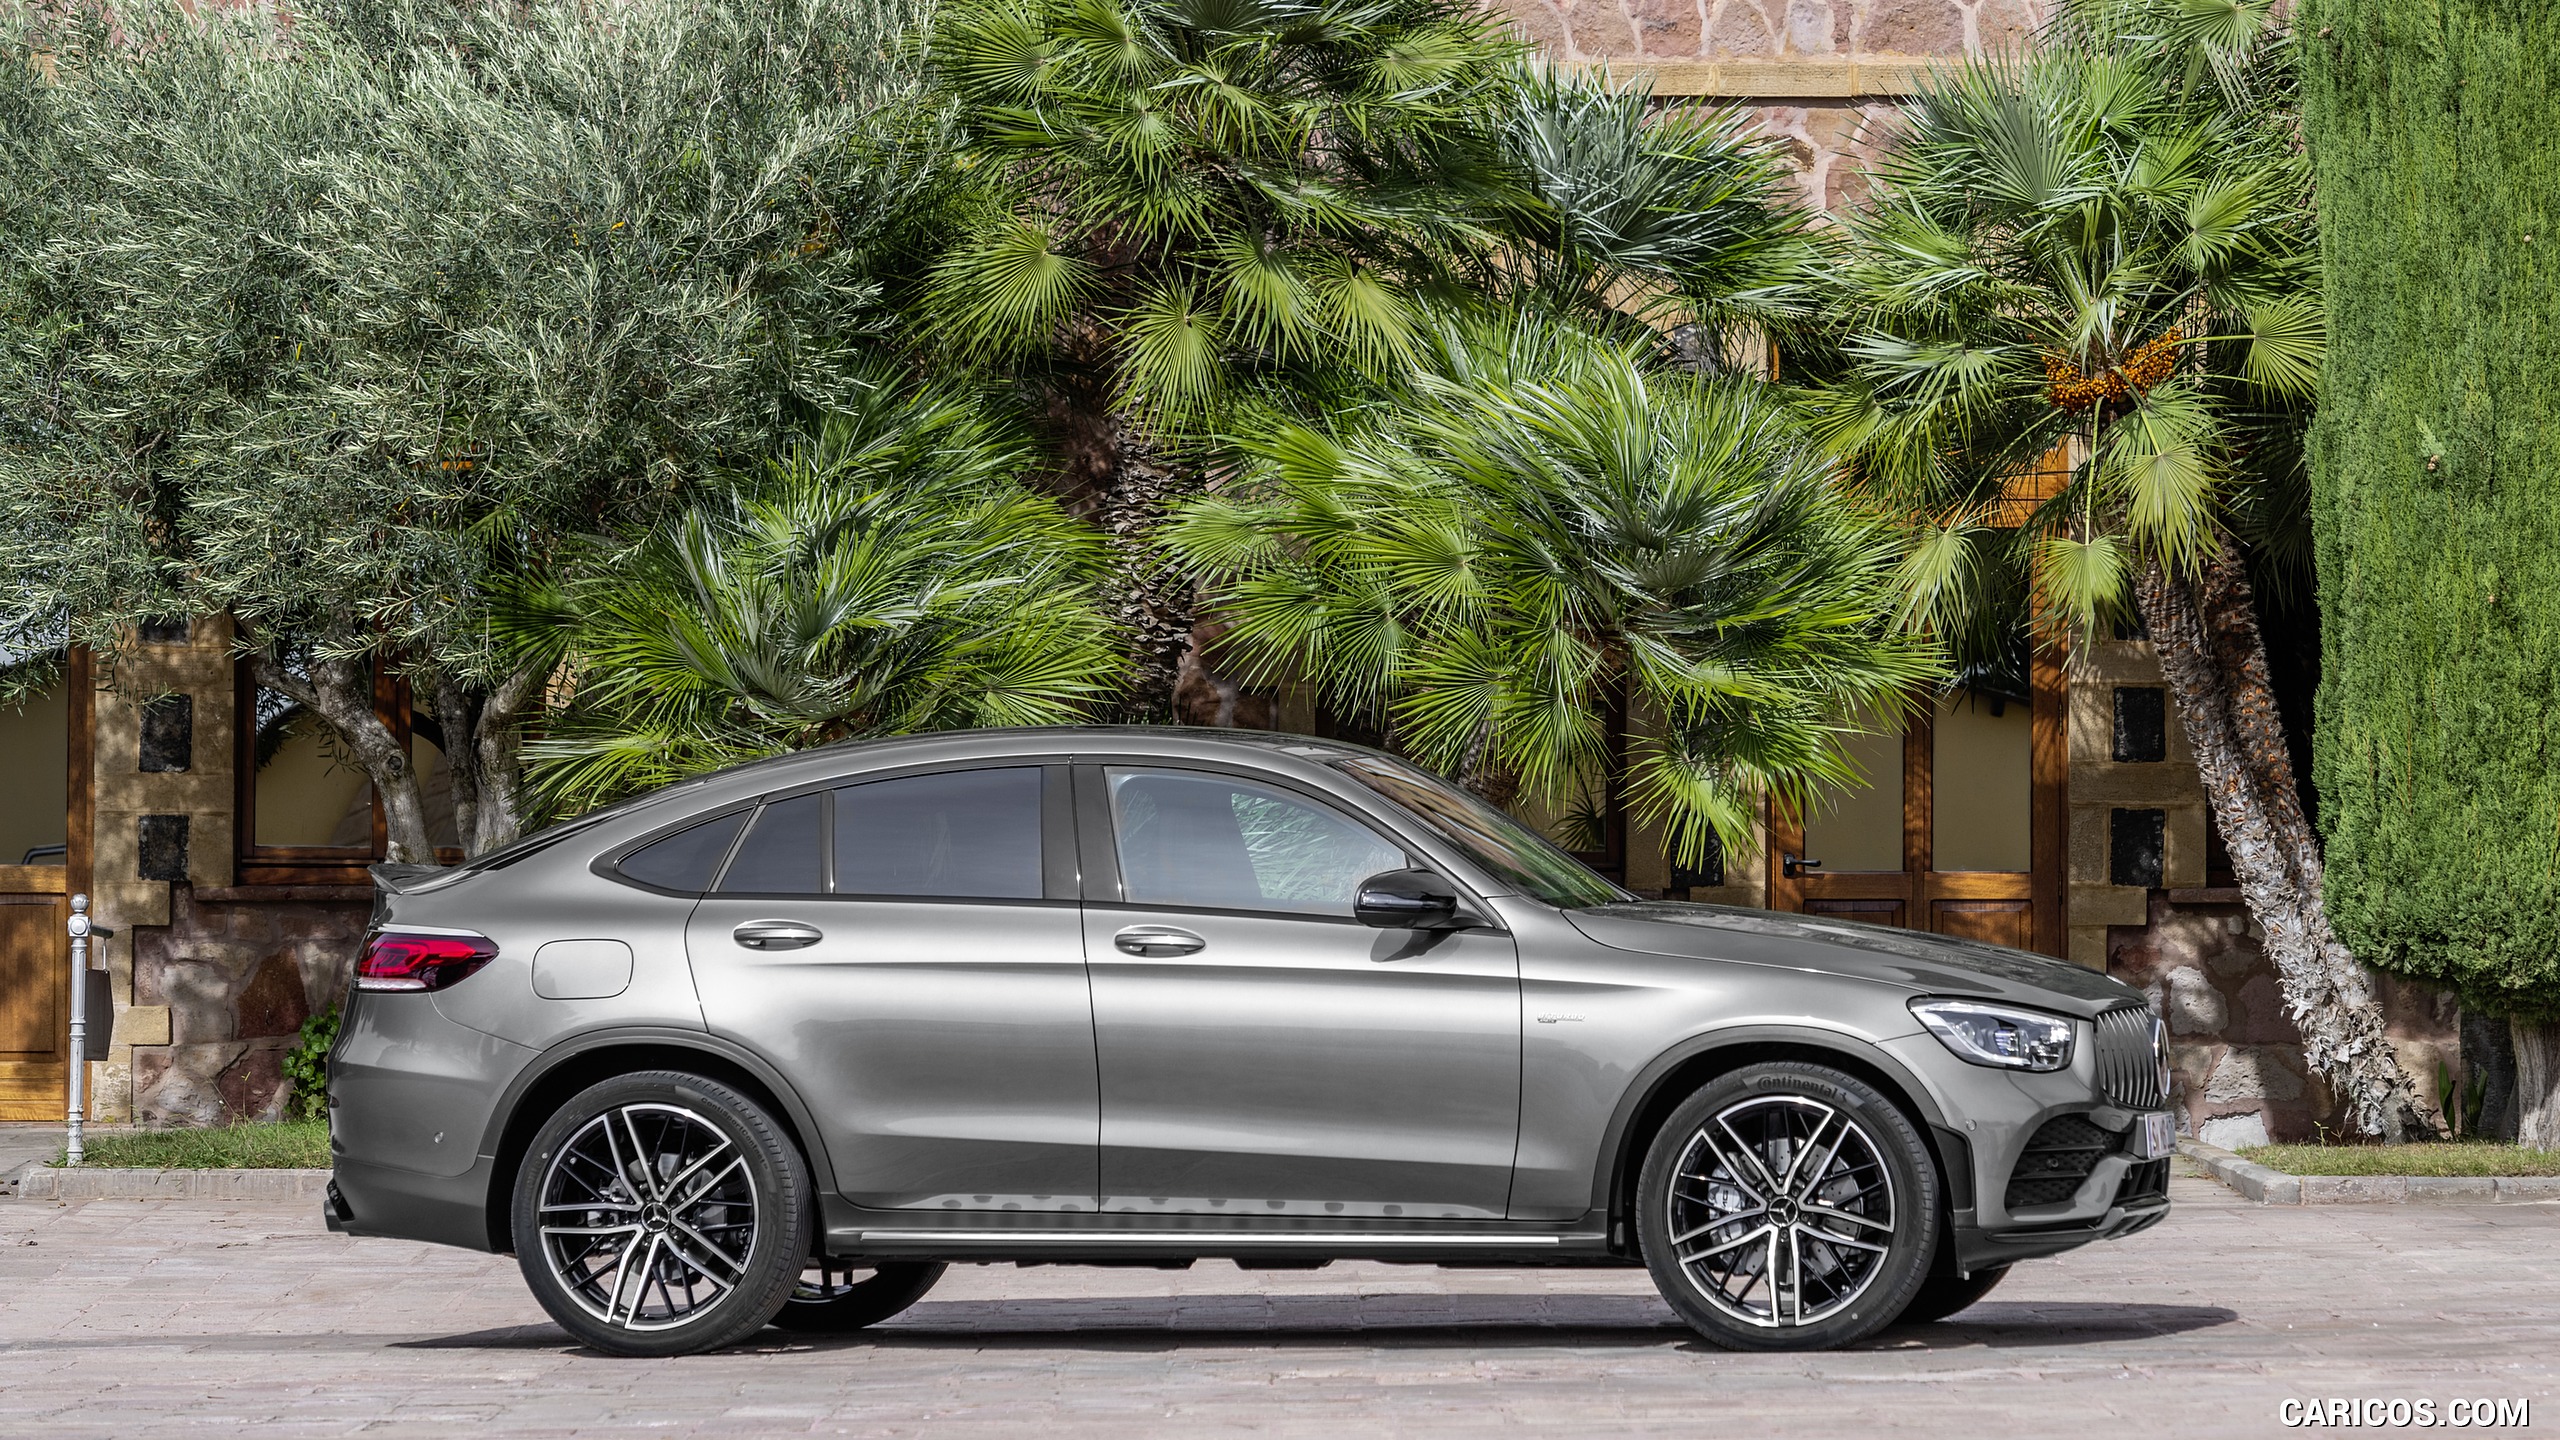 2020 Mercedes-AMG GLC 43 4MATIC Coupe - Side, #15 of 173